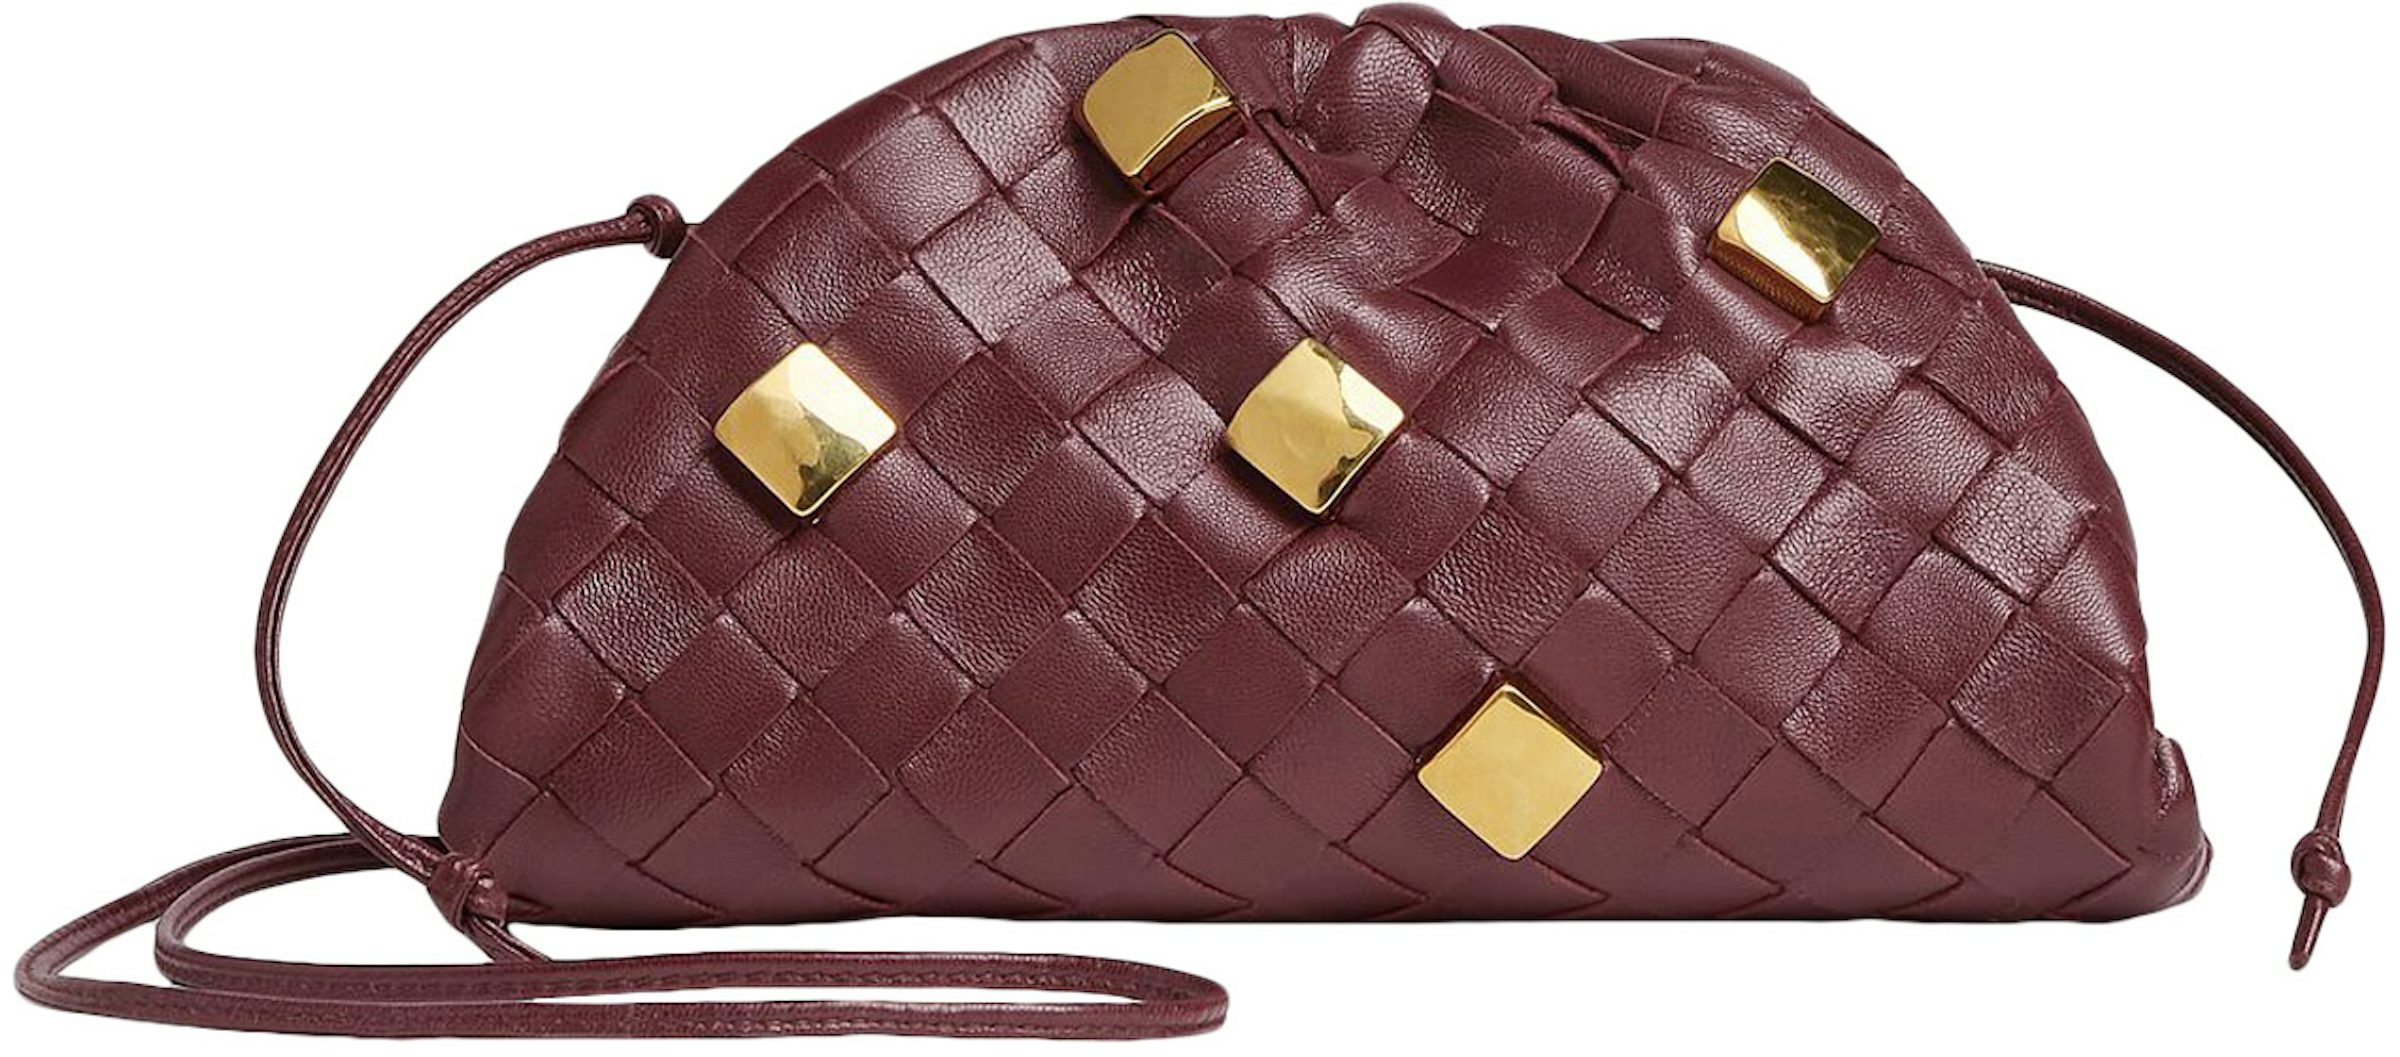 Louis Vuitton's Macaron Bag Has Is The Accessory With Highest CP